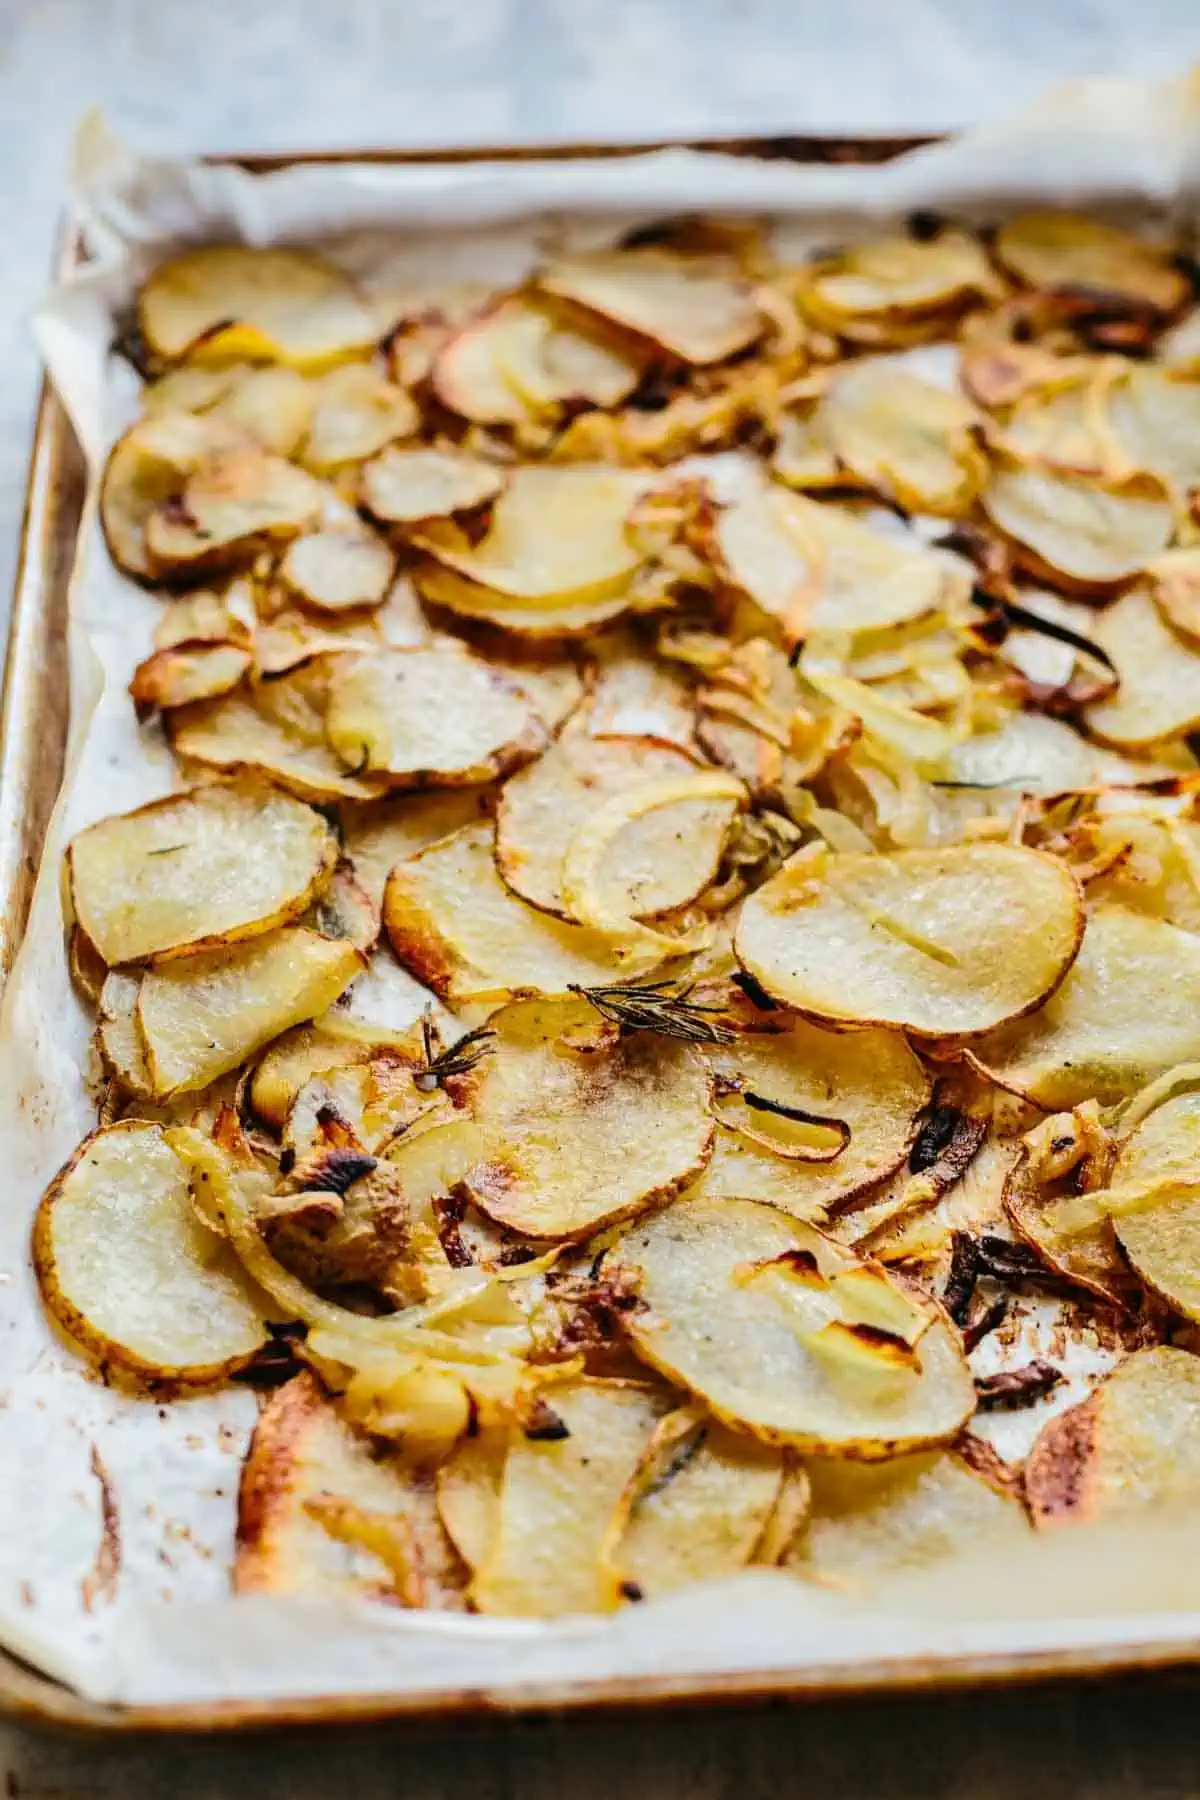 A close up of roasted potatoes and onions on a baking sheet.